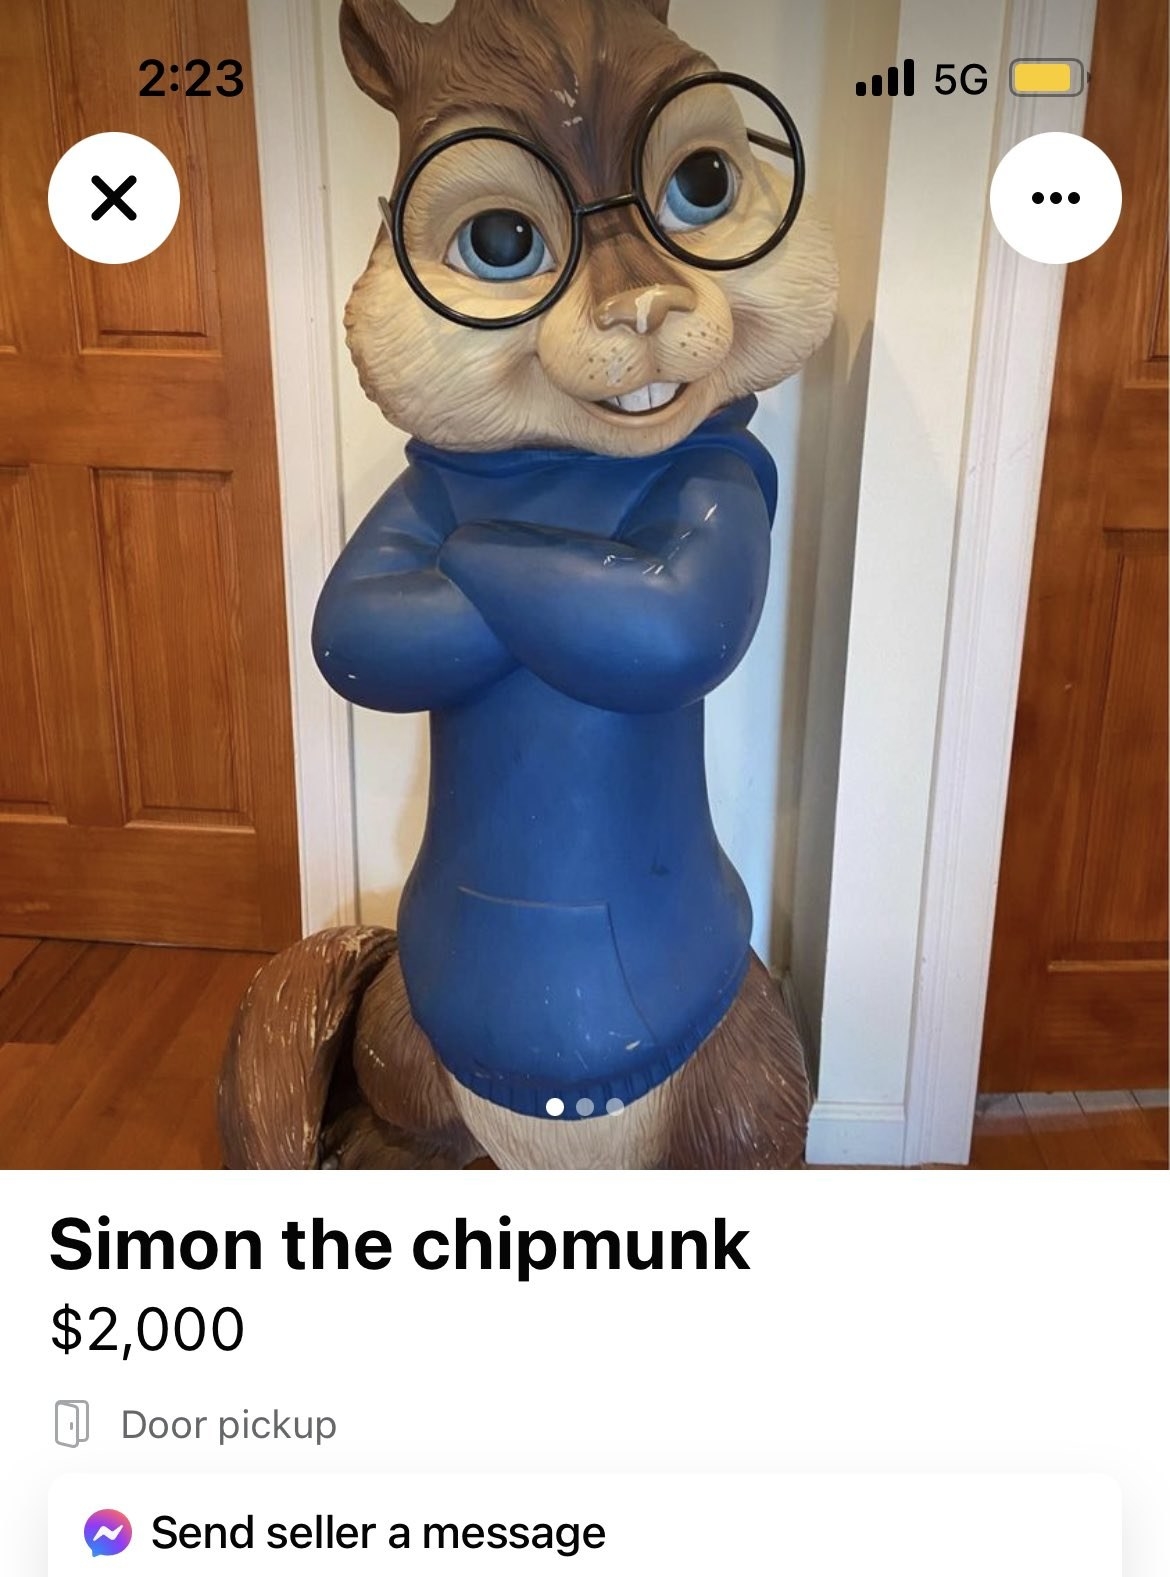 Simon the chipmunk statue selling for $2,000